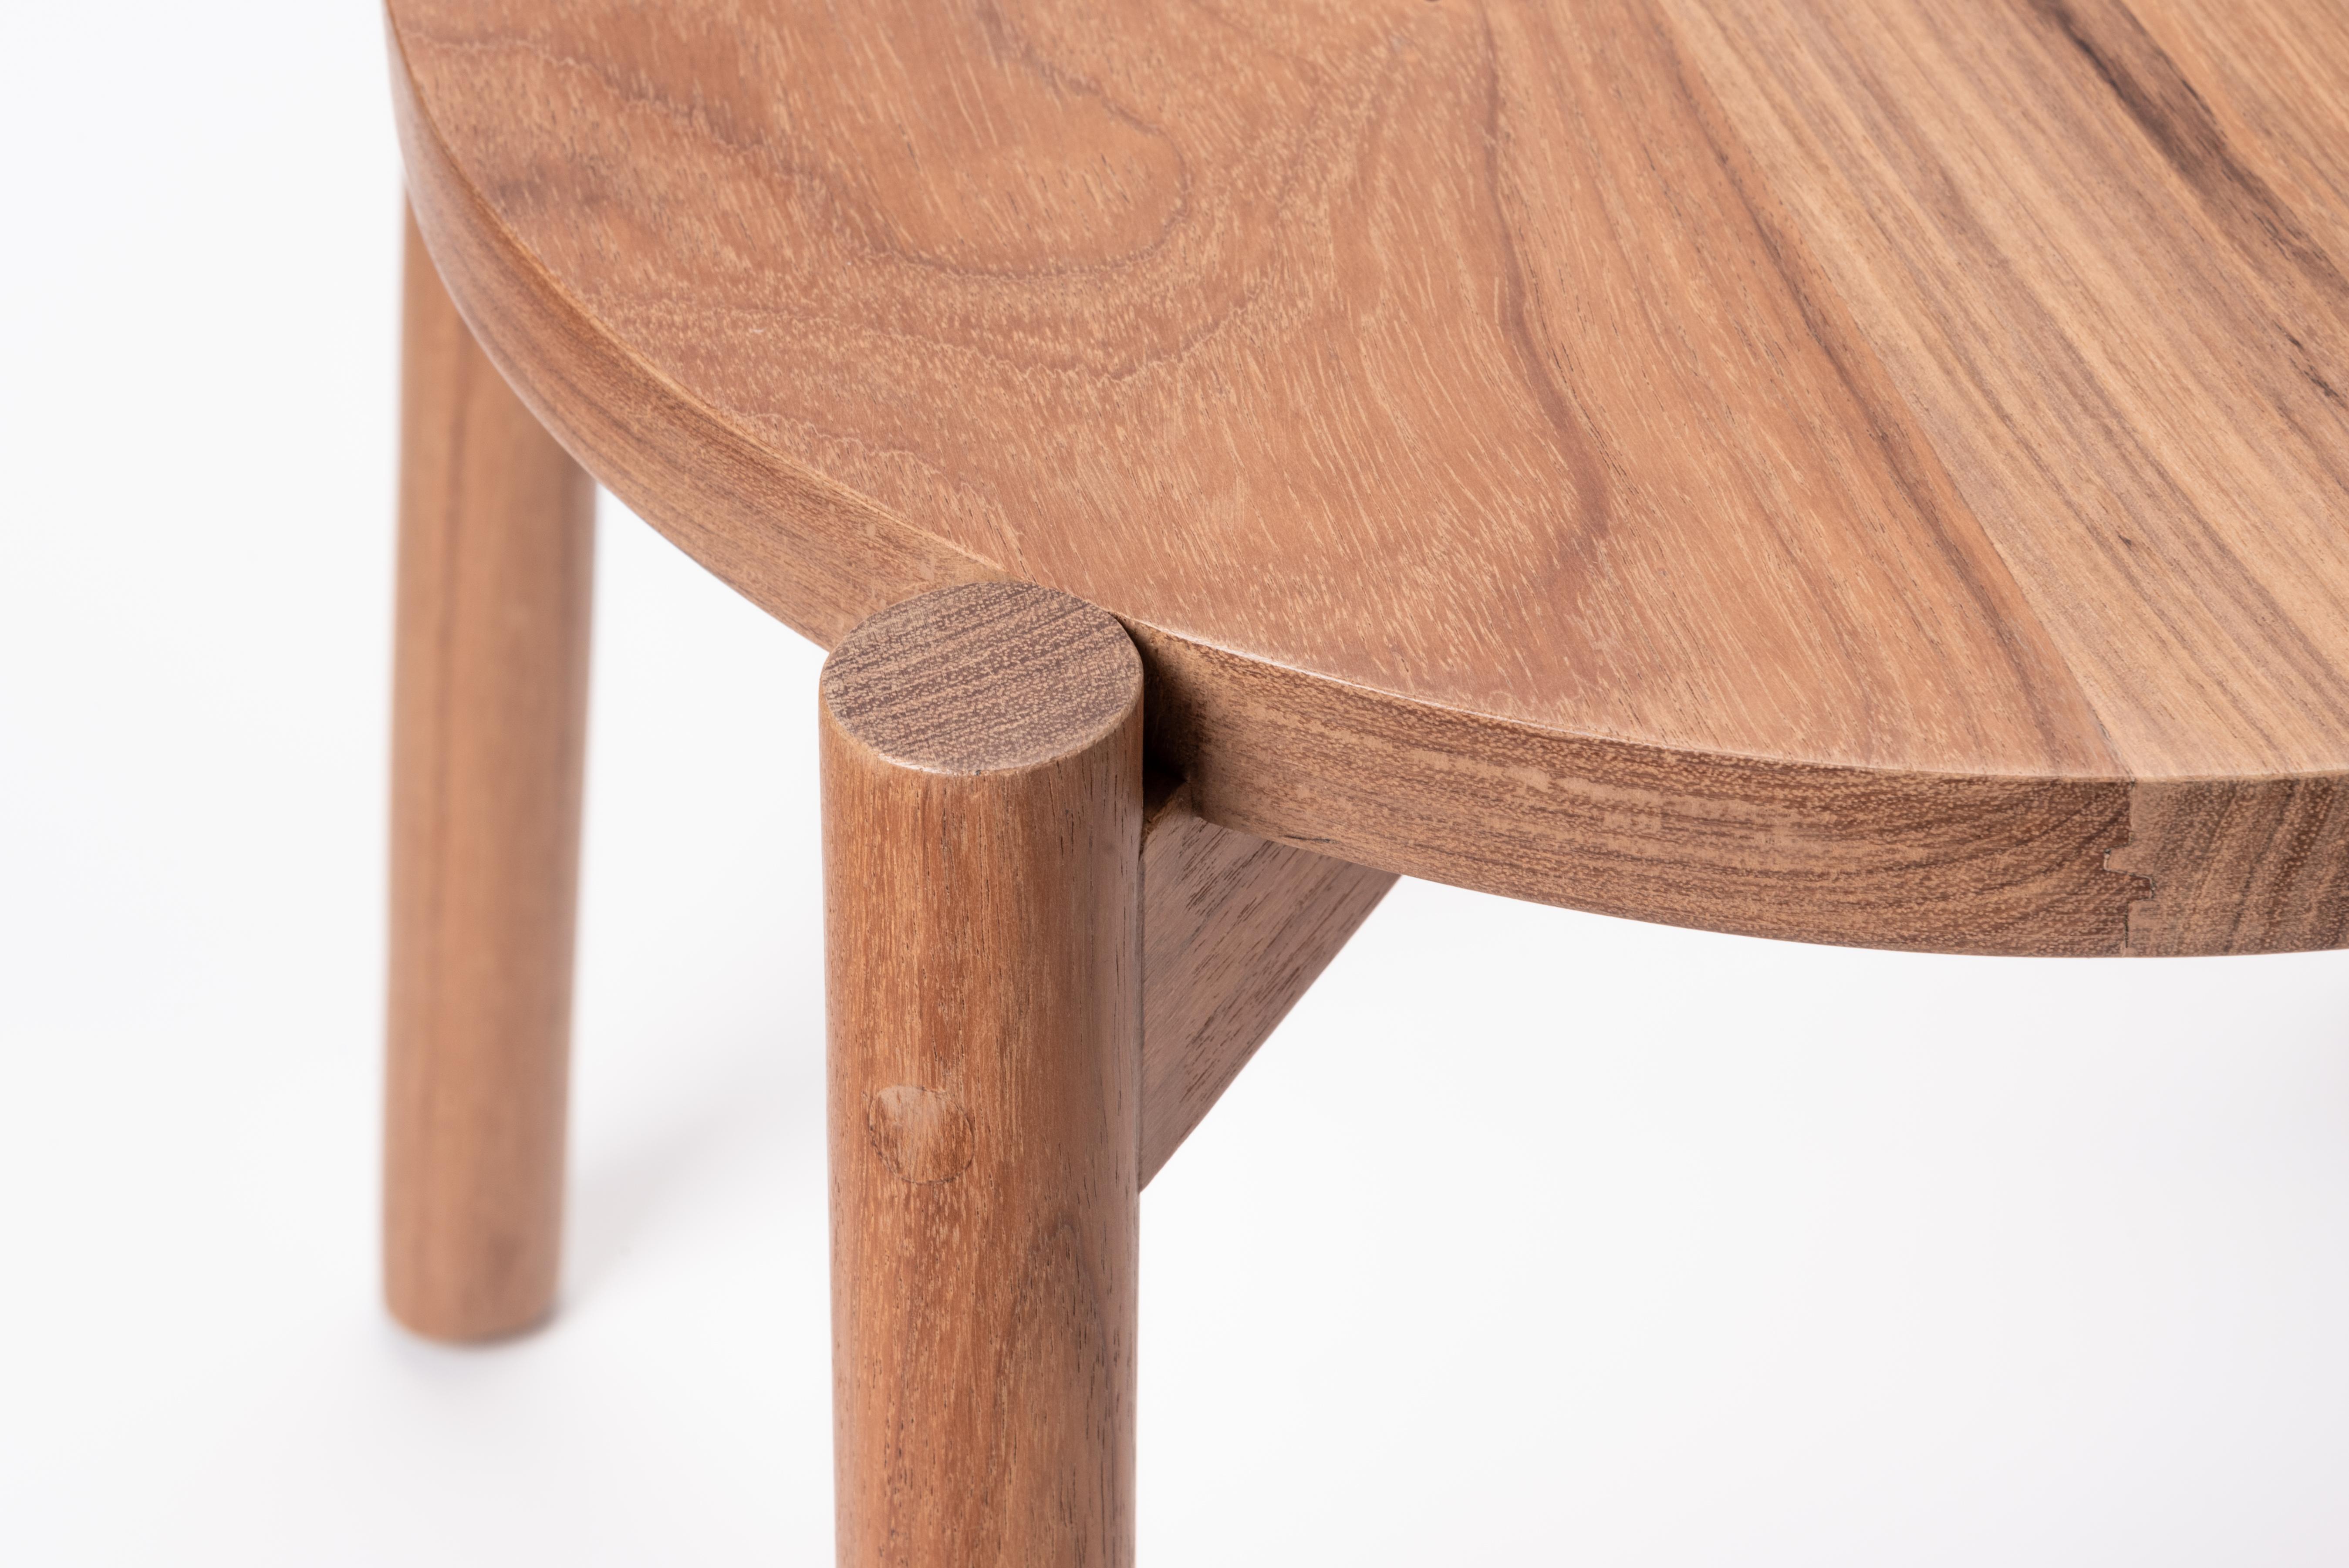 A chair for all occasions, from the ordinary to the extraordinary. This piece of furniture serves as a synthesis of structure and form, both remarked by its constructive clarity and silent beauty. 

Crafted in Tzalam wood by fine cabinetmakers in